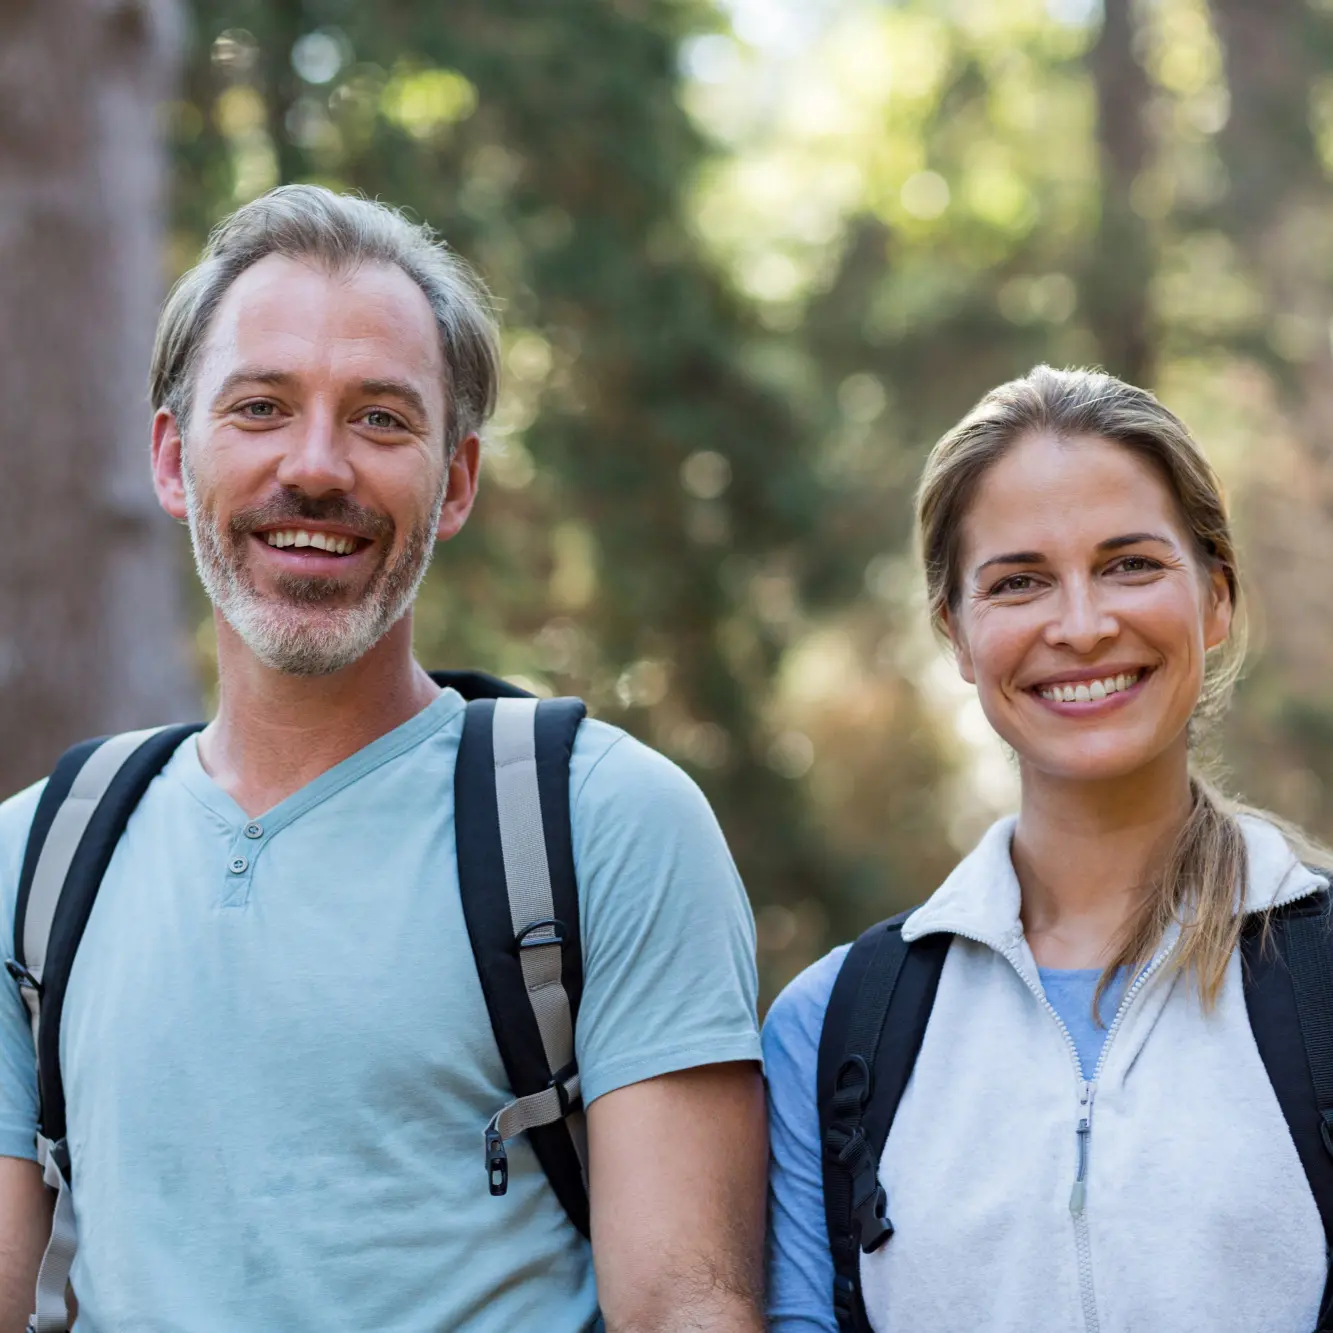 Smiling middle-aged couple hiking outdoors